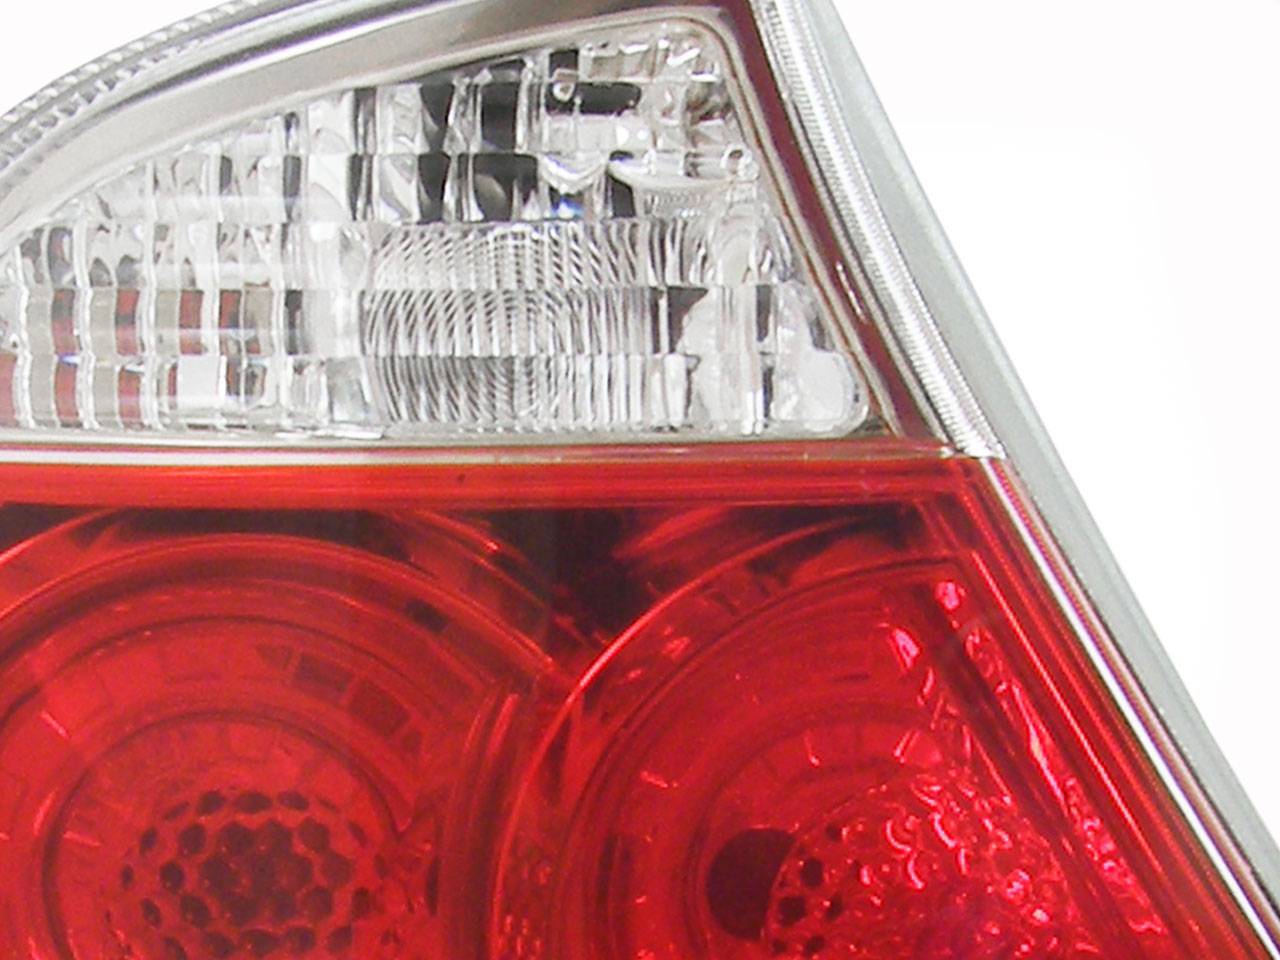 LHS Tail Light Suits Toyota Camry 04-06 ADR COMPLIANT - Aftermarket